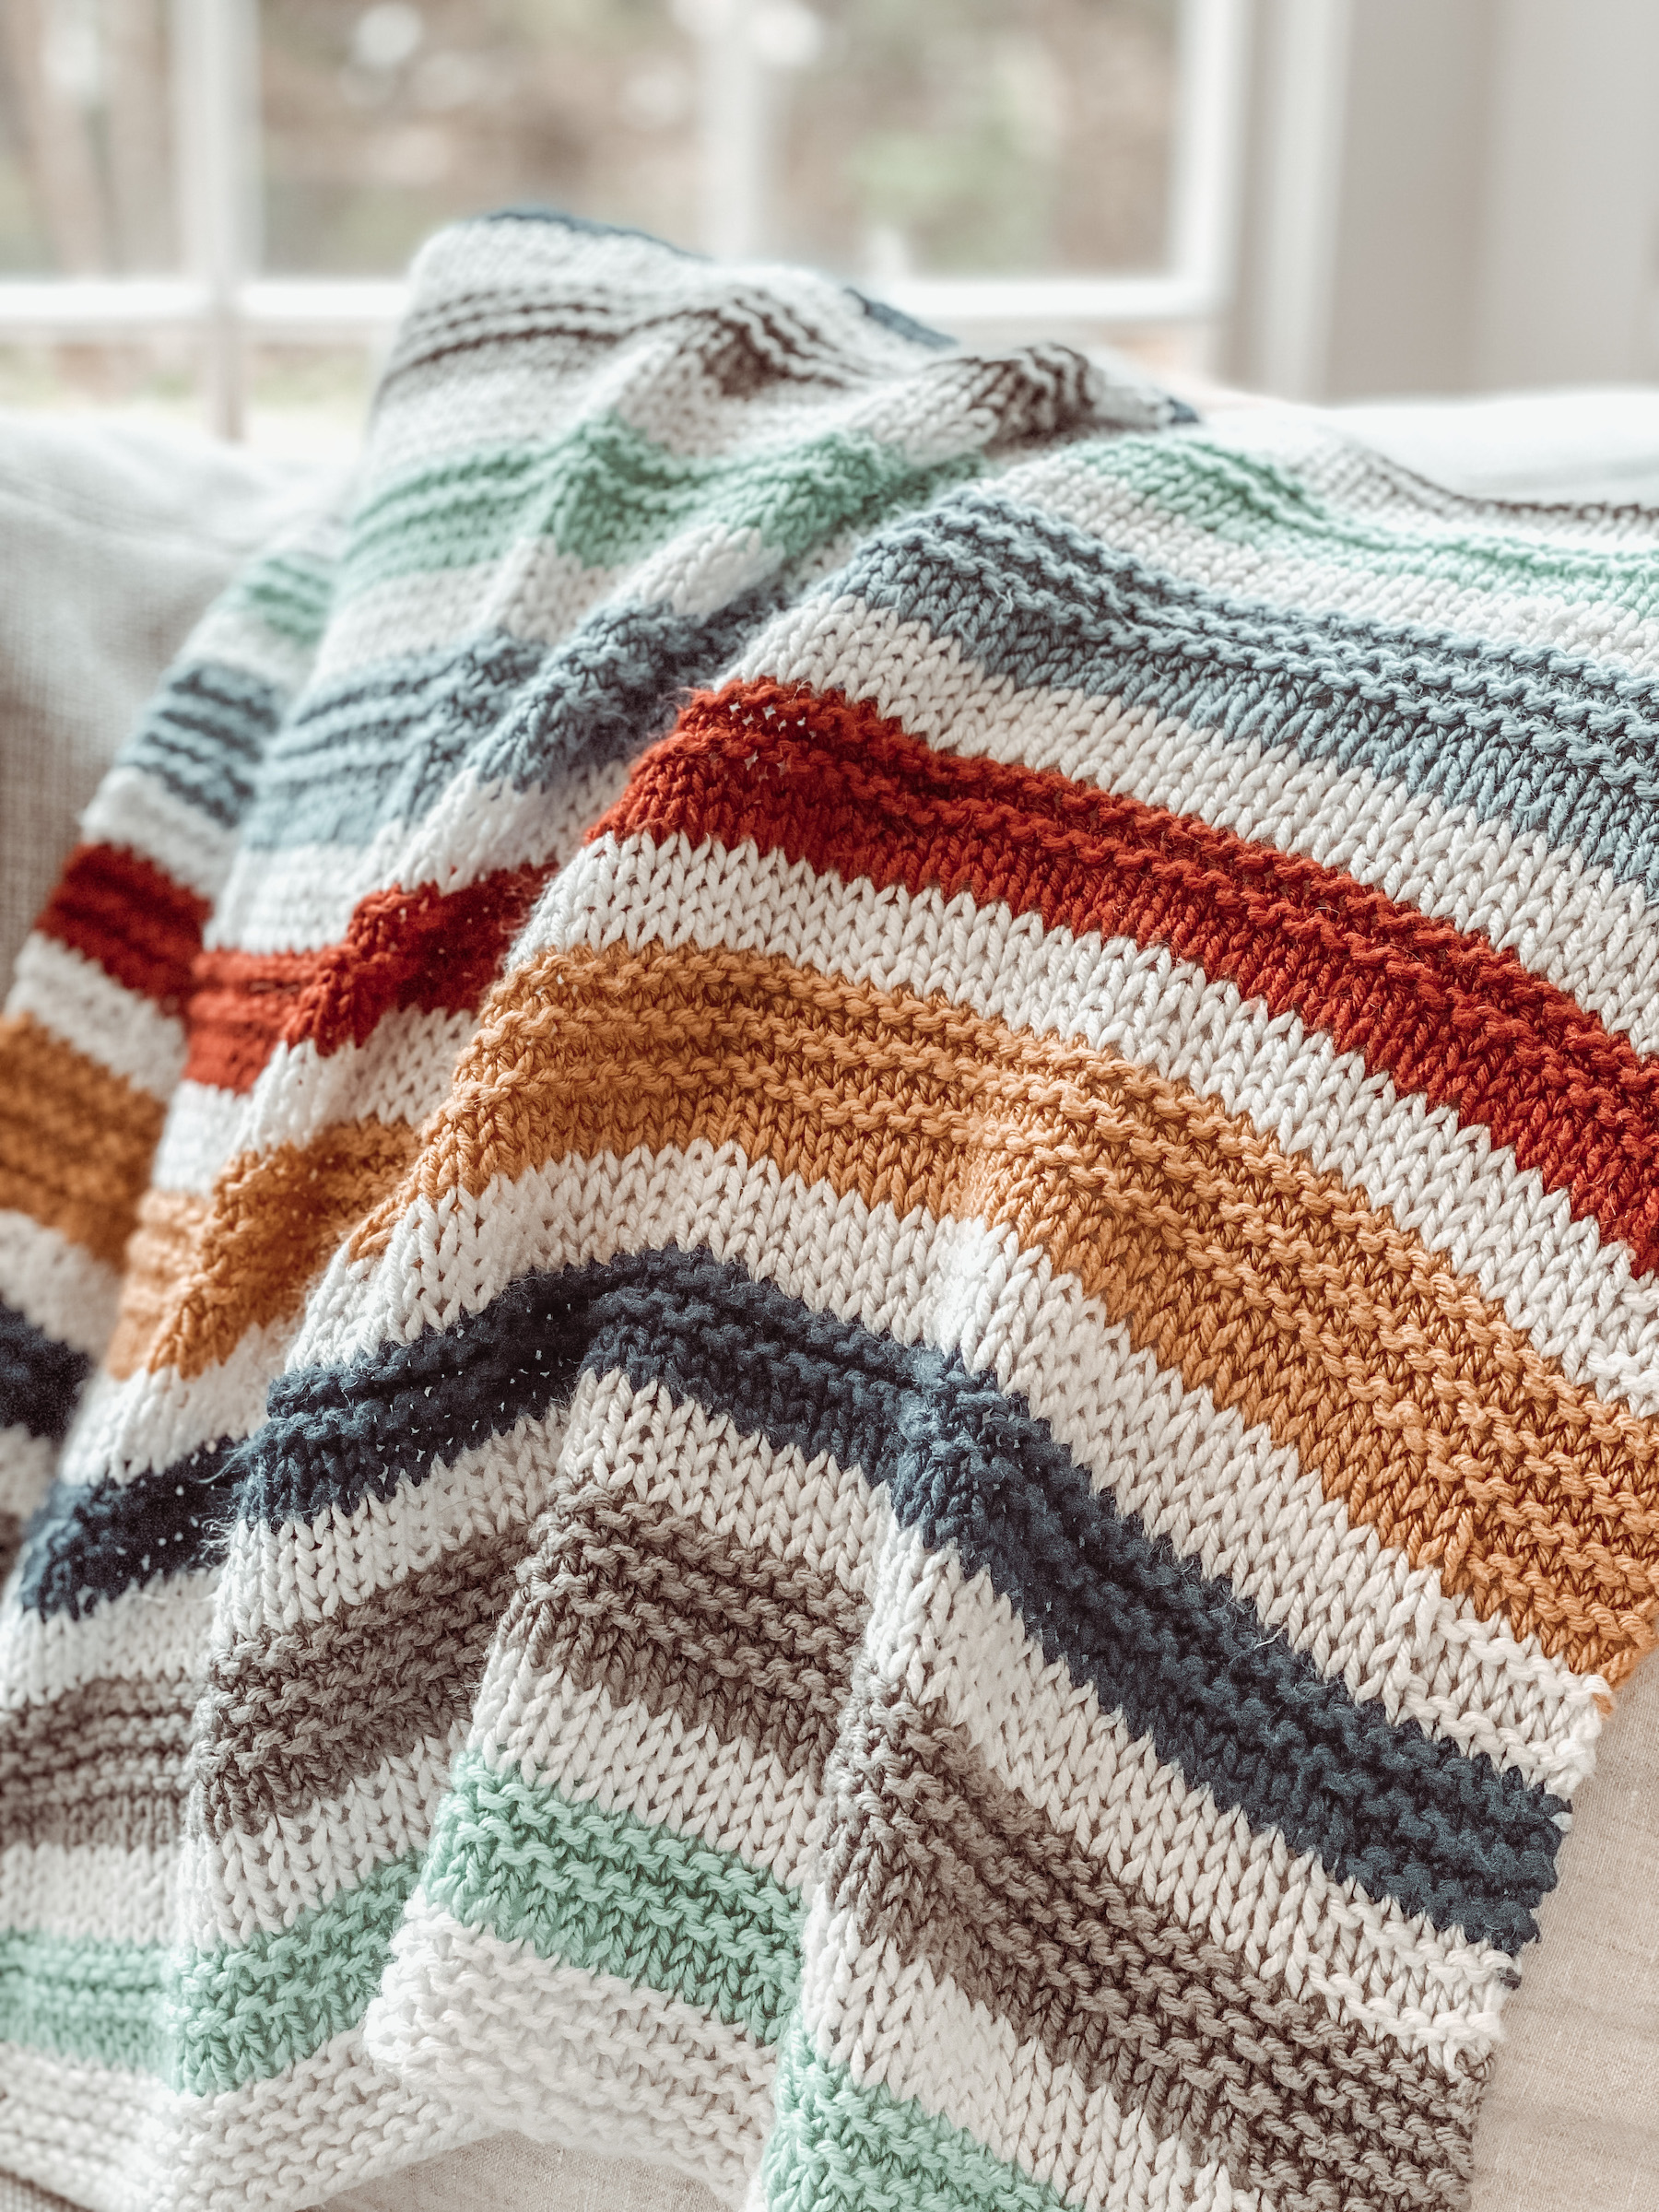 Ravelry: Three Wishes Baby Blanket pattern by candylou